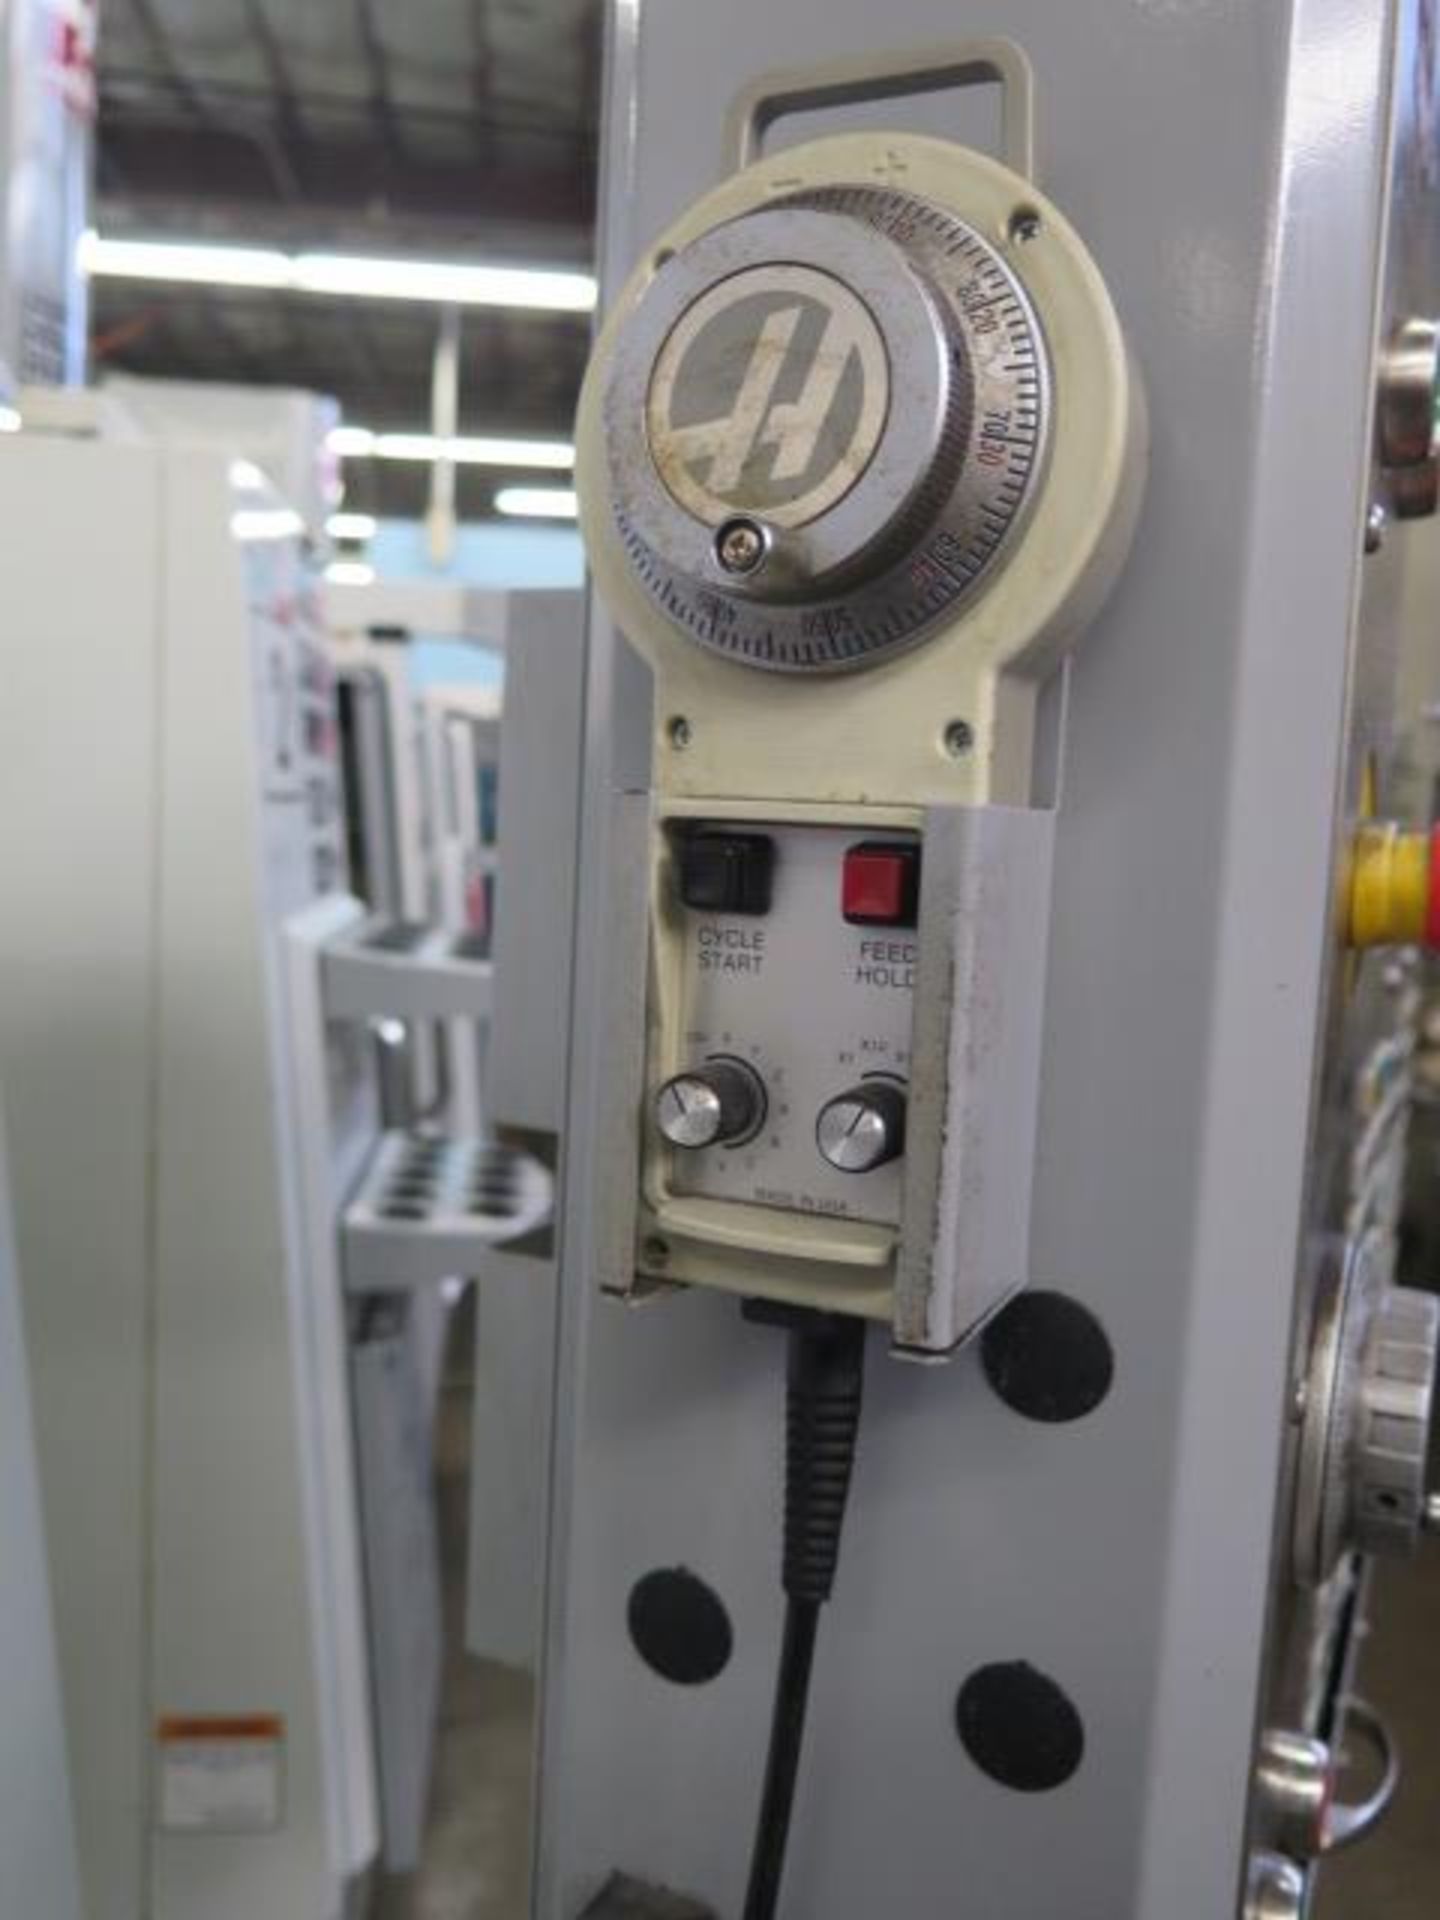 2007 Haas VF-2SSYT 4-Axis CNC VMC s/n 1061412 w/ Haas Controls, Hand Wheel, SOLD AS IS - Image 11 of 20